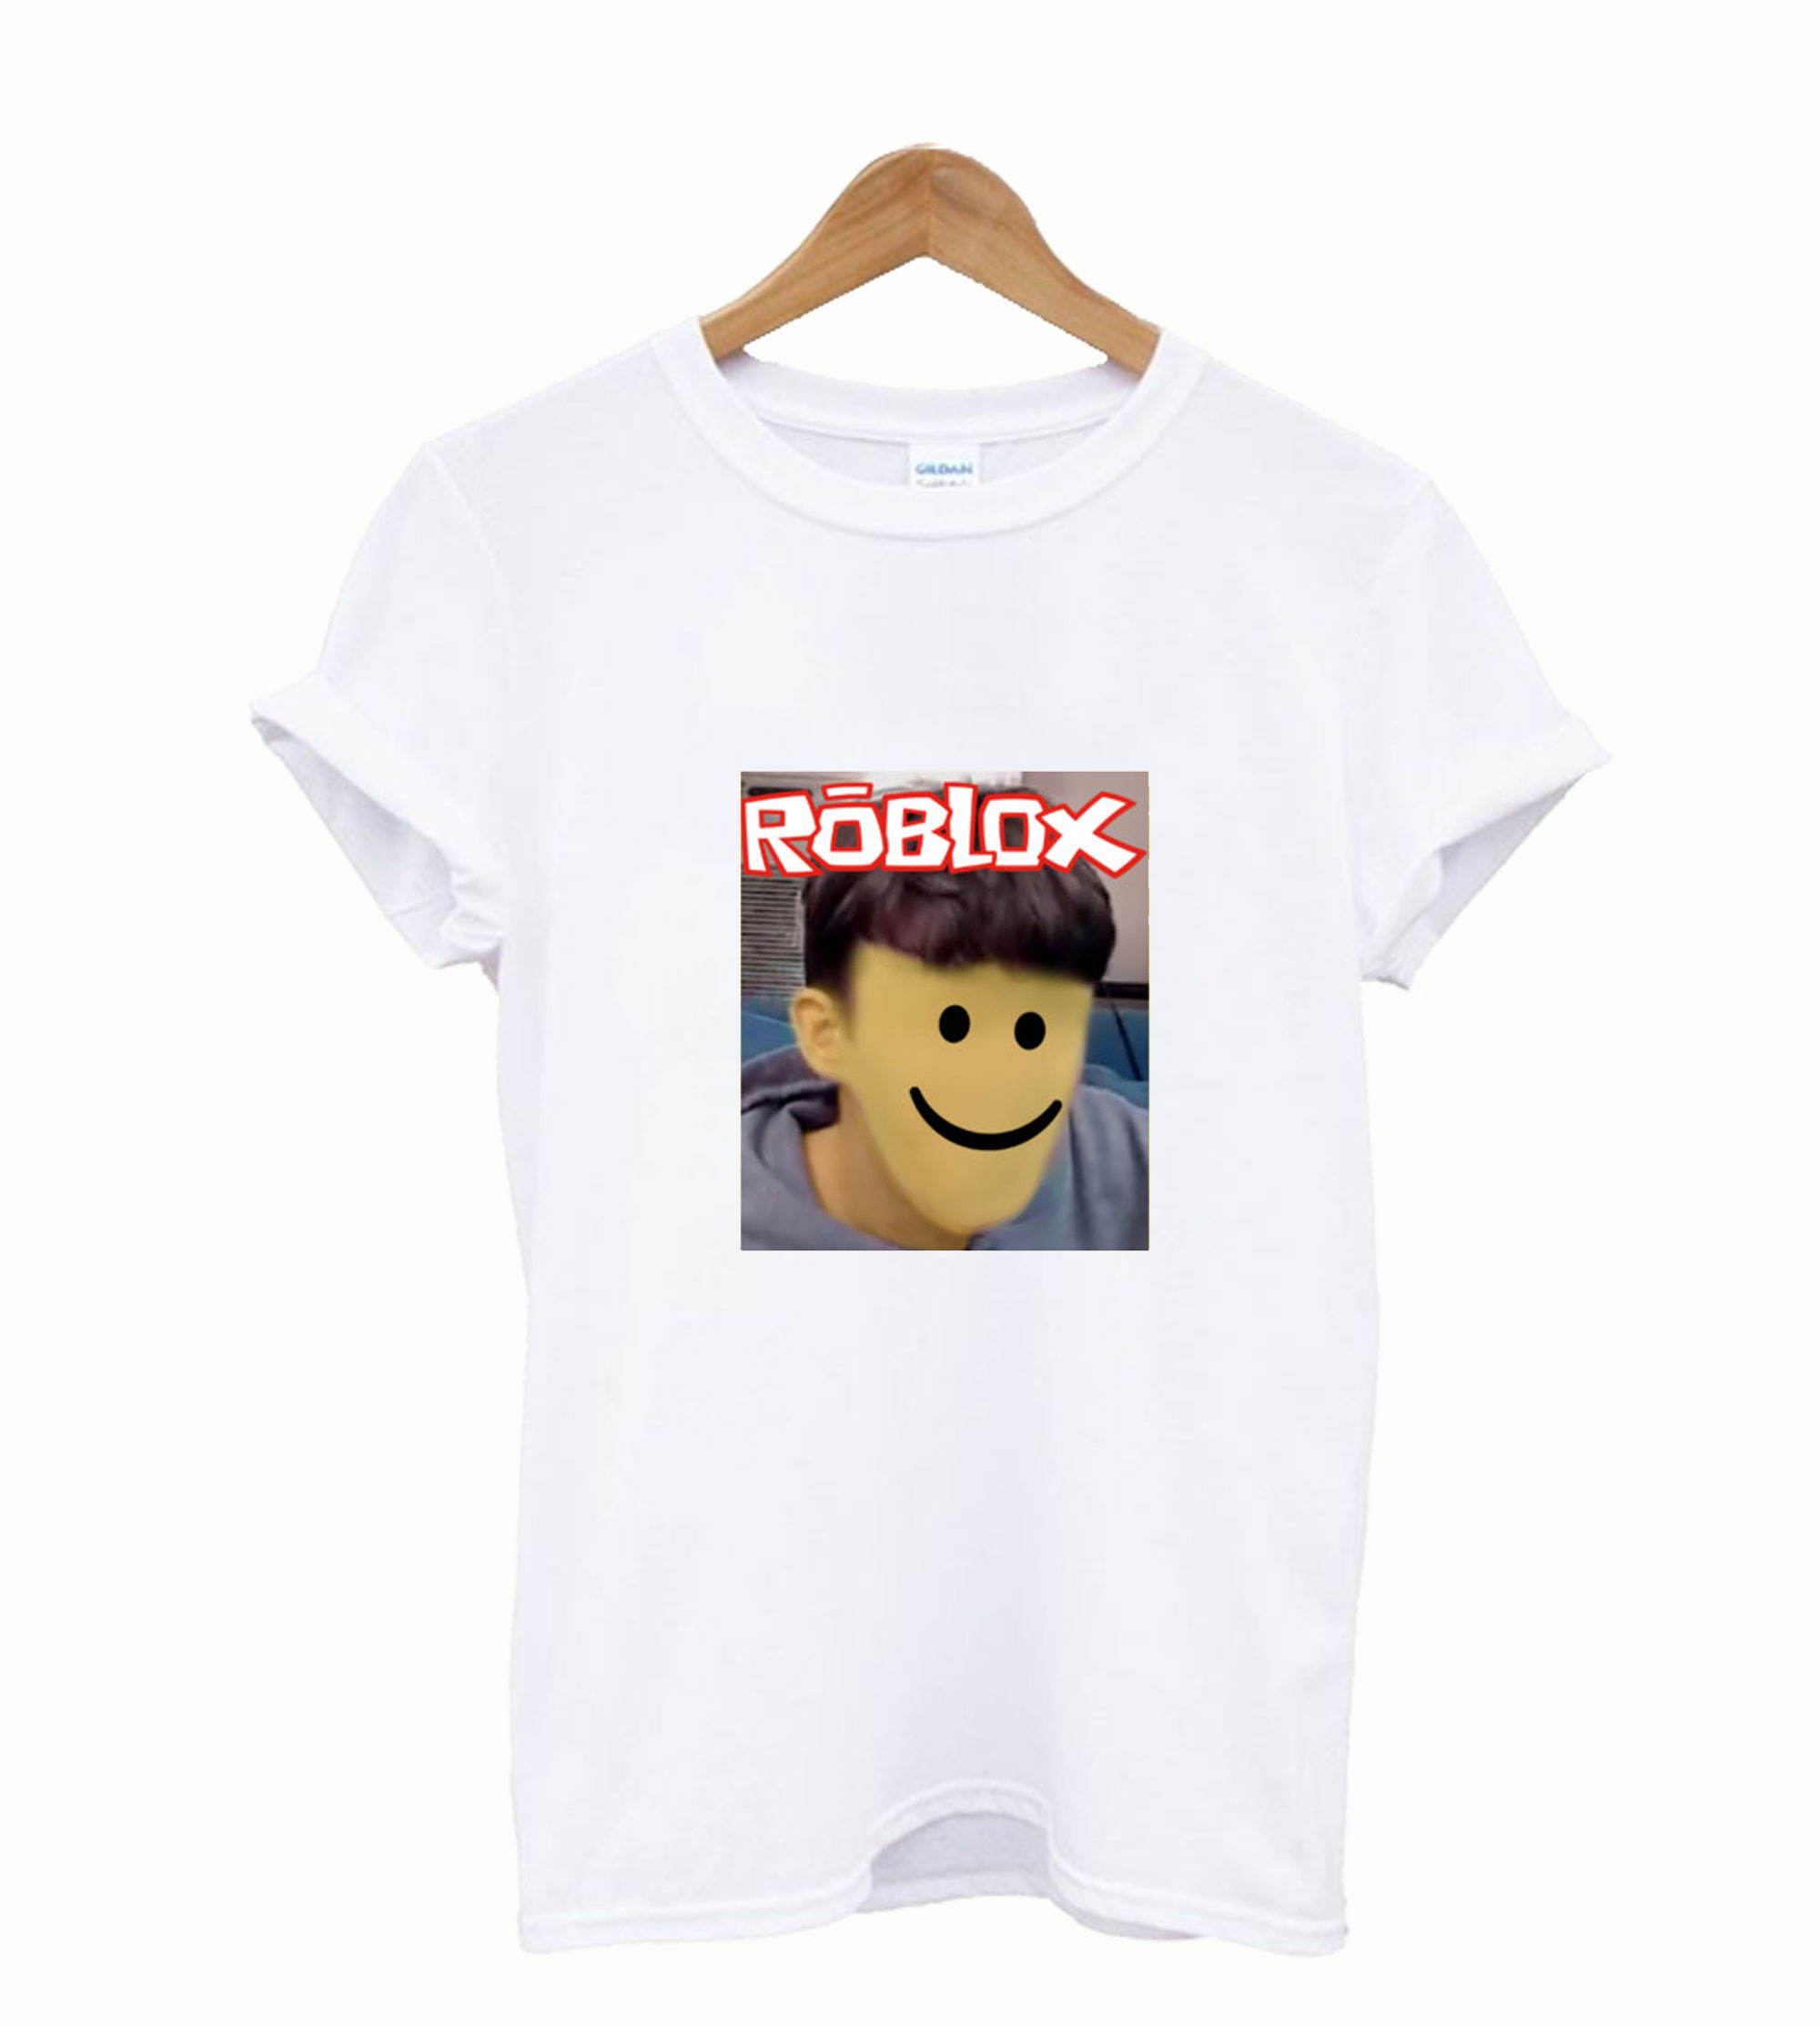 Paul From The Beatles T Shirt Roblox